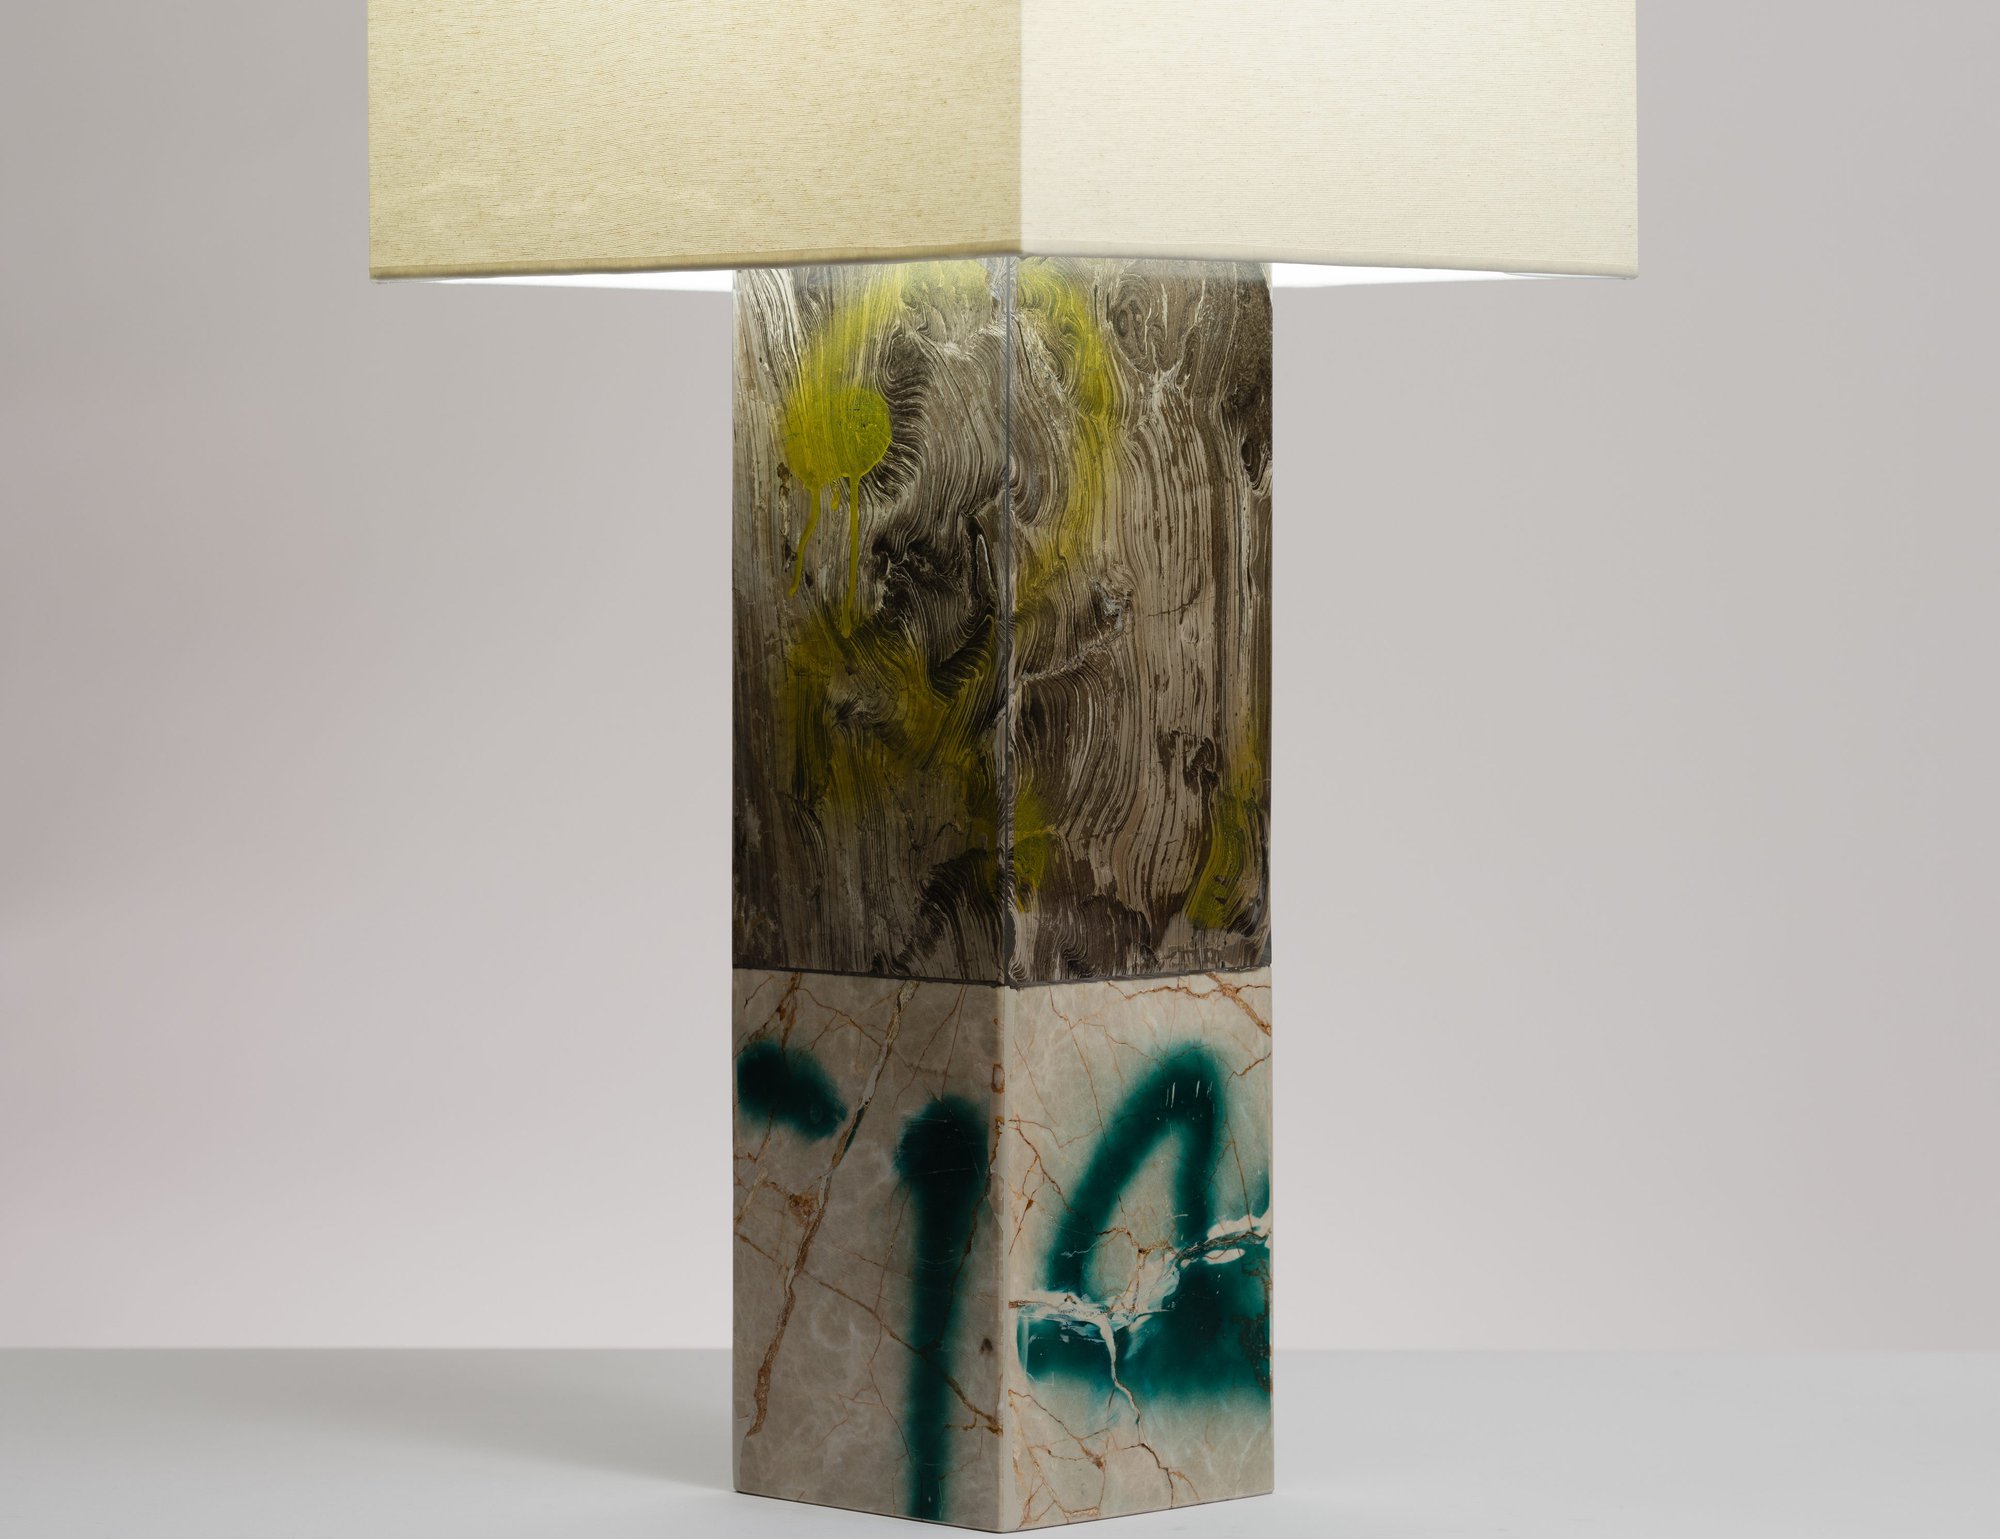 Christodoulos Panayiotou, Untitled, lamp, Cappuccino and Ligourio marble base, 50 x 14.5 x 14.5 cm (19 3/4 x 5 3/4 x 5 3/4 in); Linetta fabric shade, 34 x 34.4 x 34.4 cm (13 3/8 x 13 1/2 x 13 1/2 in), light fitting, 2021